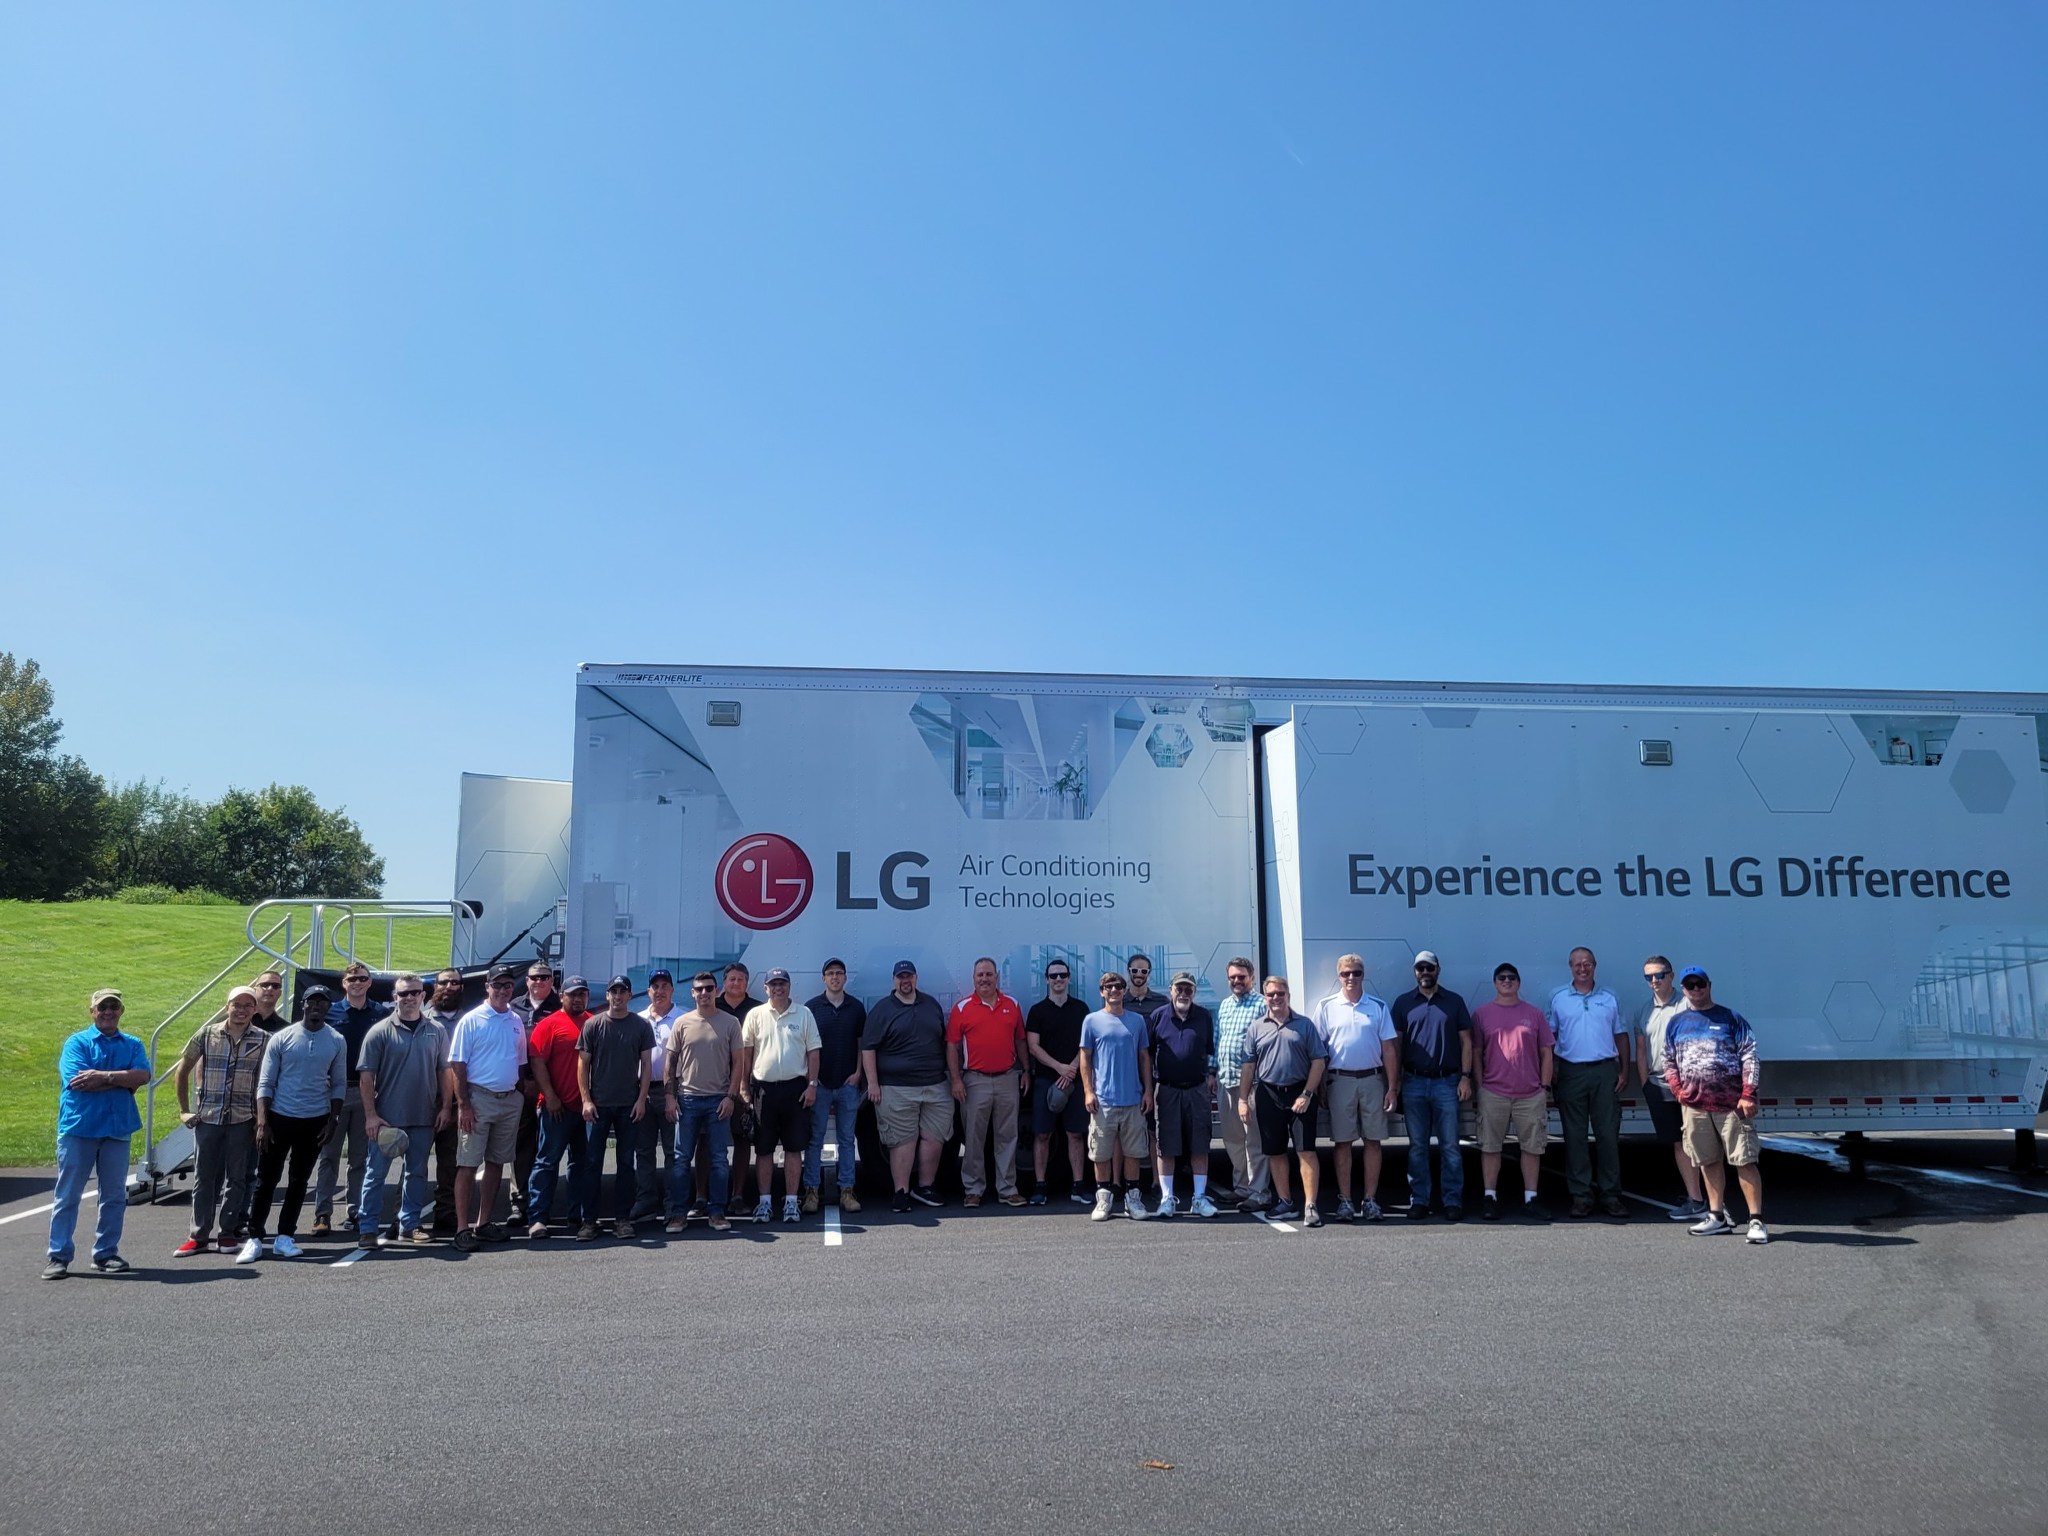 Group of people posing with LG mobile trailer